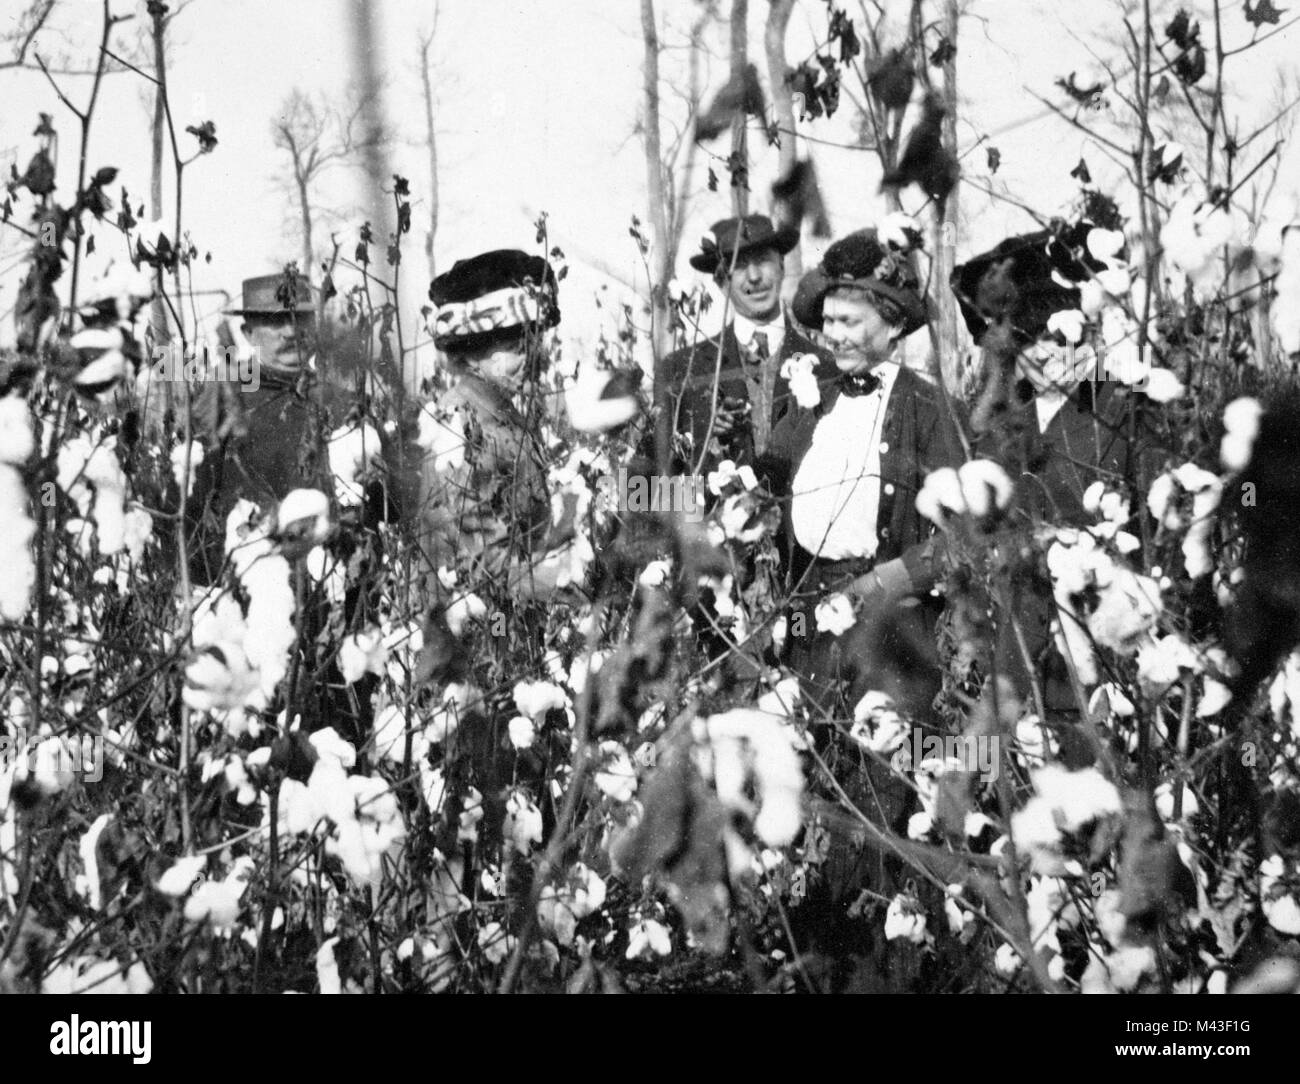 Three wealthy women and two wealthy men play in the cotton while touring a plantation in the American South, ca. 1910. Stock Photo